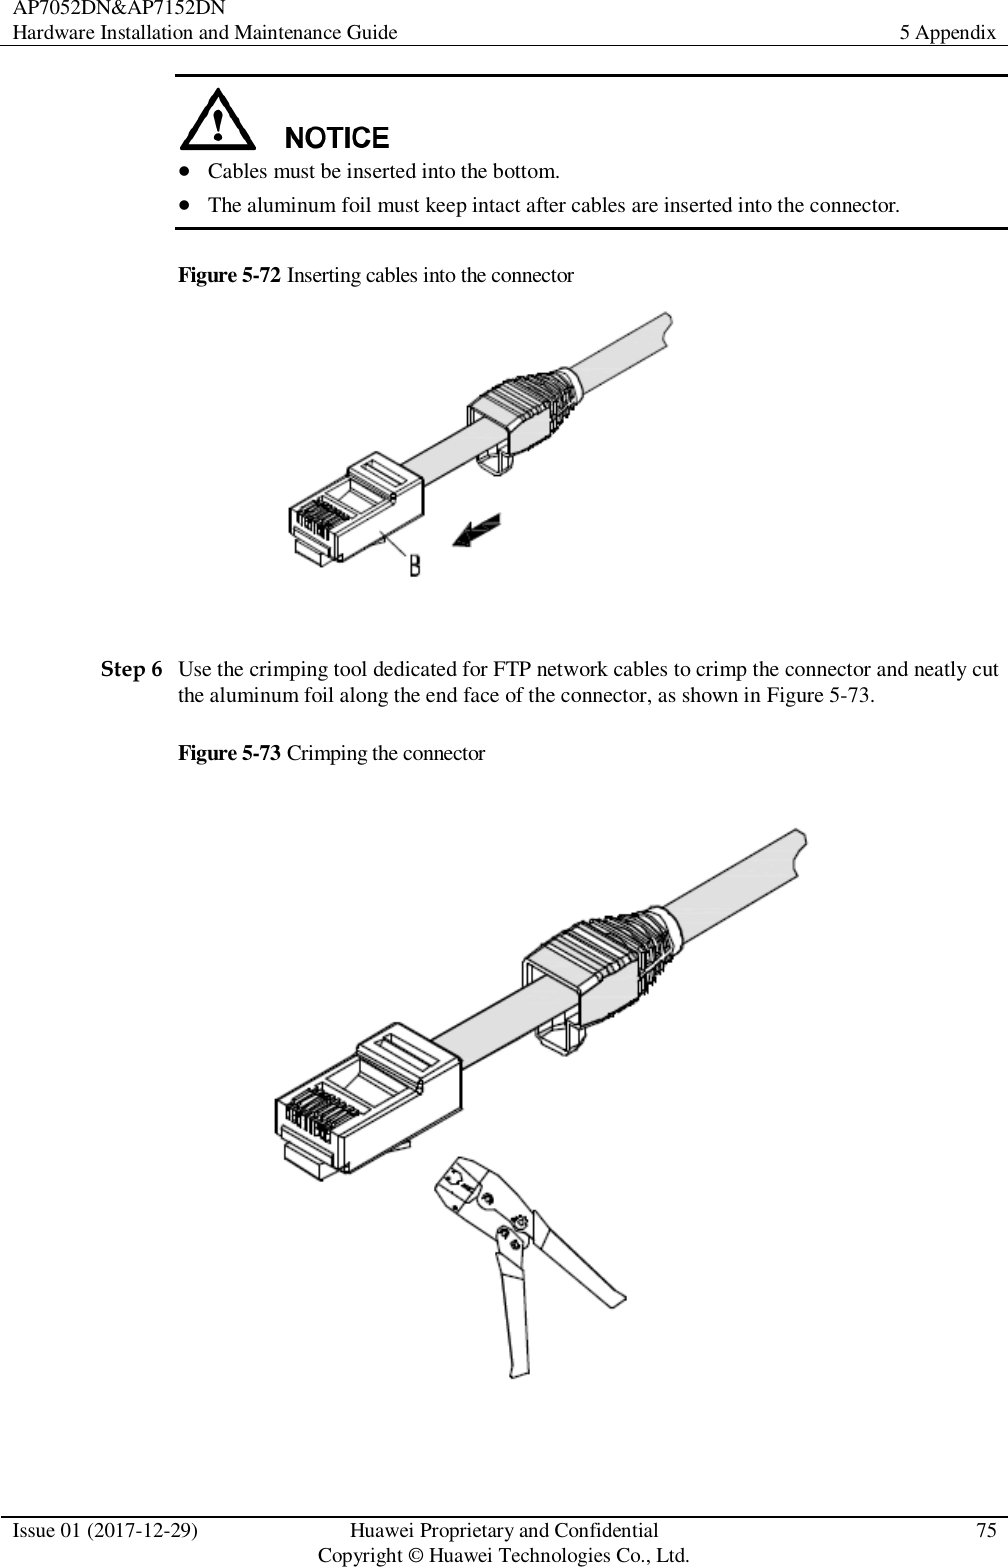 AP7052DN&amp;AP7152DN Hardware Installation and Maintenance Guide 5 Appendix  Issue 01 (2017-12-29) Huawei Proprietary and Confidential                                     Copyright © Huawei Technologies Co., Ltd. 75    Cables must be inserted into the bottom.    The aluminum foil must keep intact after cables are inserted into the connector.   Figure 5-72 Inserting cables into the connector   Step 6 Use the crimping tool dedicated for FTP network cables to crimp the connector and neatly cut the aluminum foil along the end face of the connector, as shown in Figure 5-73. Figure 5-73 Crimping the connector   